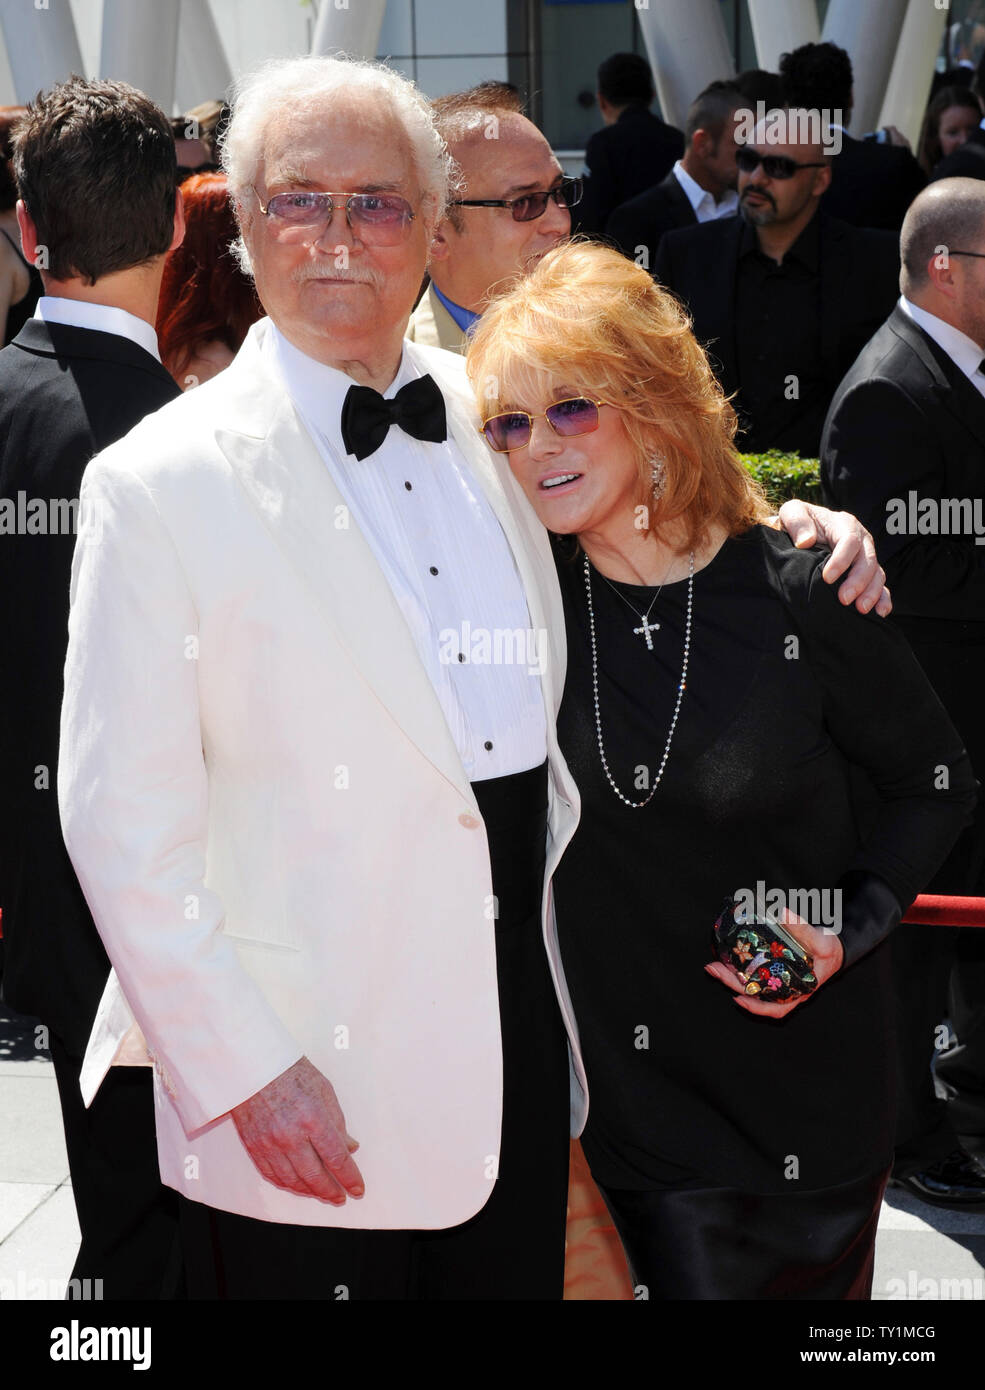 Actress Ann Margret and her husband Roger Smith arrive at the Creative Arts Emmy Awards in Los Angeles on August 21, 2010.     UPI/Jim Ruymen Stock Photo